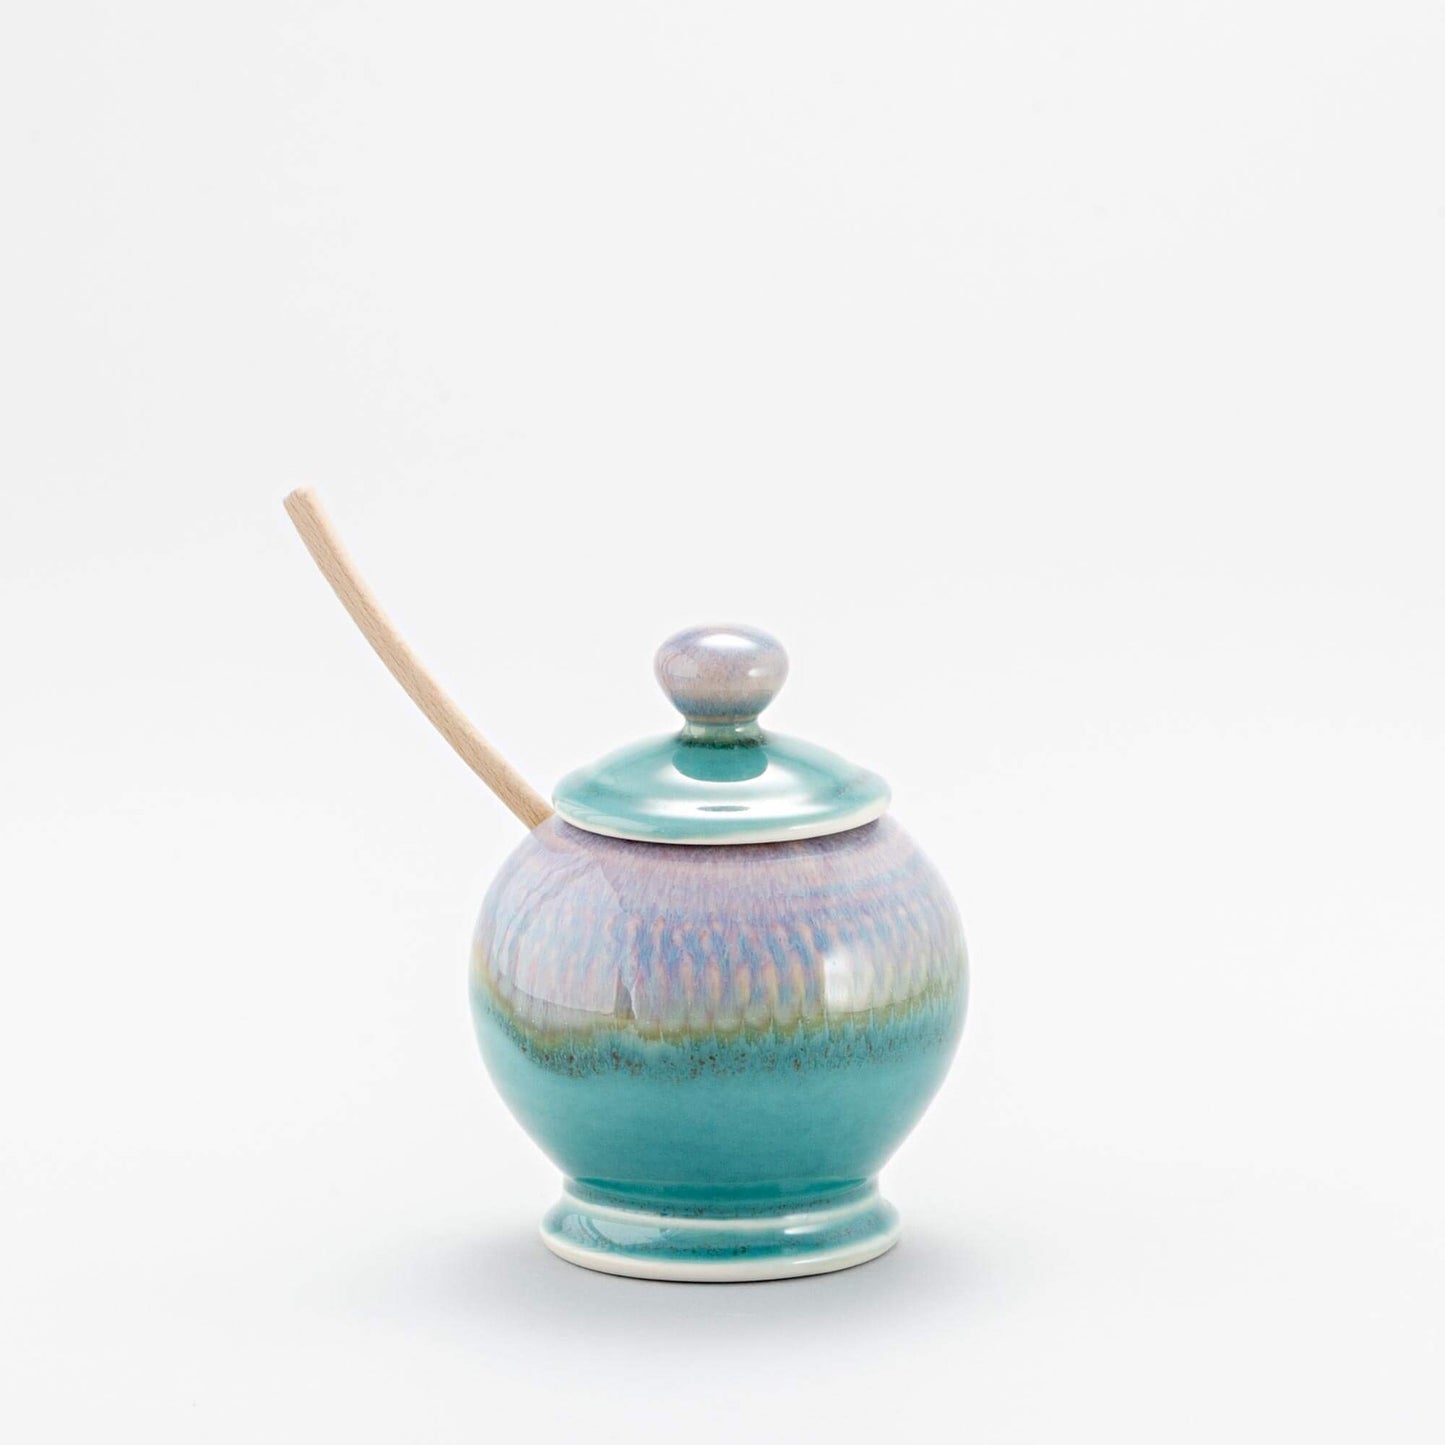 Handmade Pottery Sugar Jar in Green Oribe pattern made by Georgetown Pottery in Maine